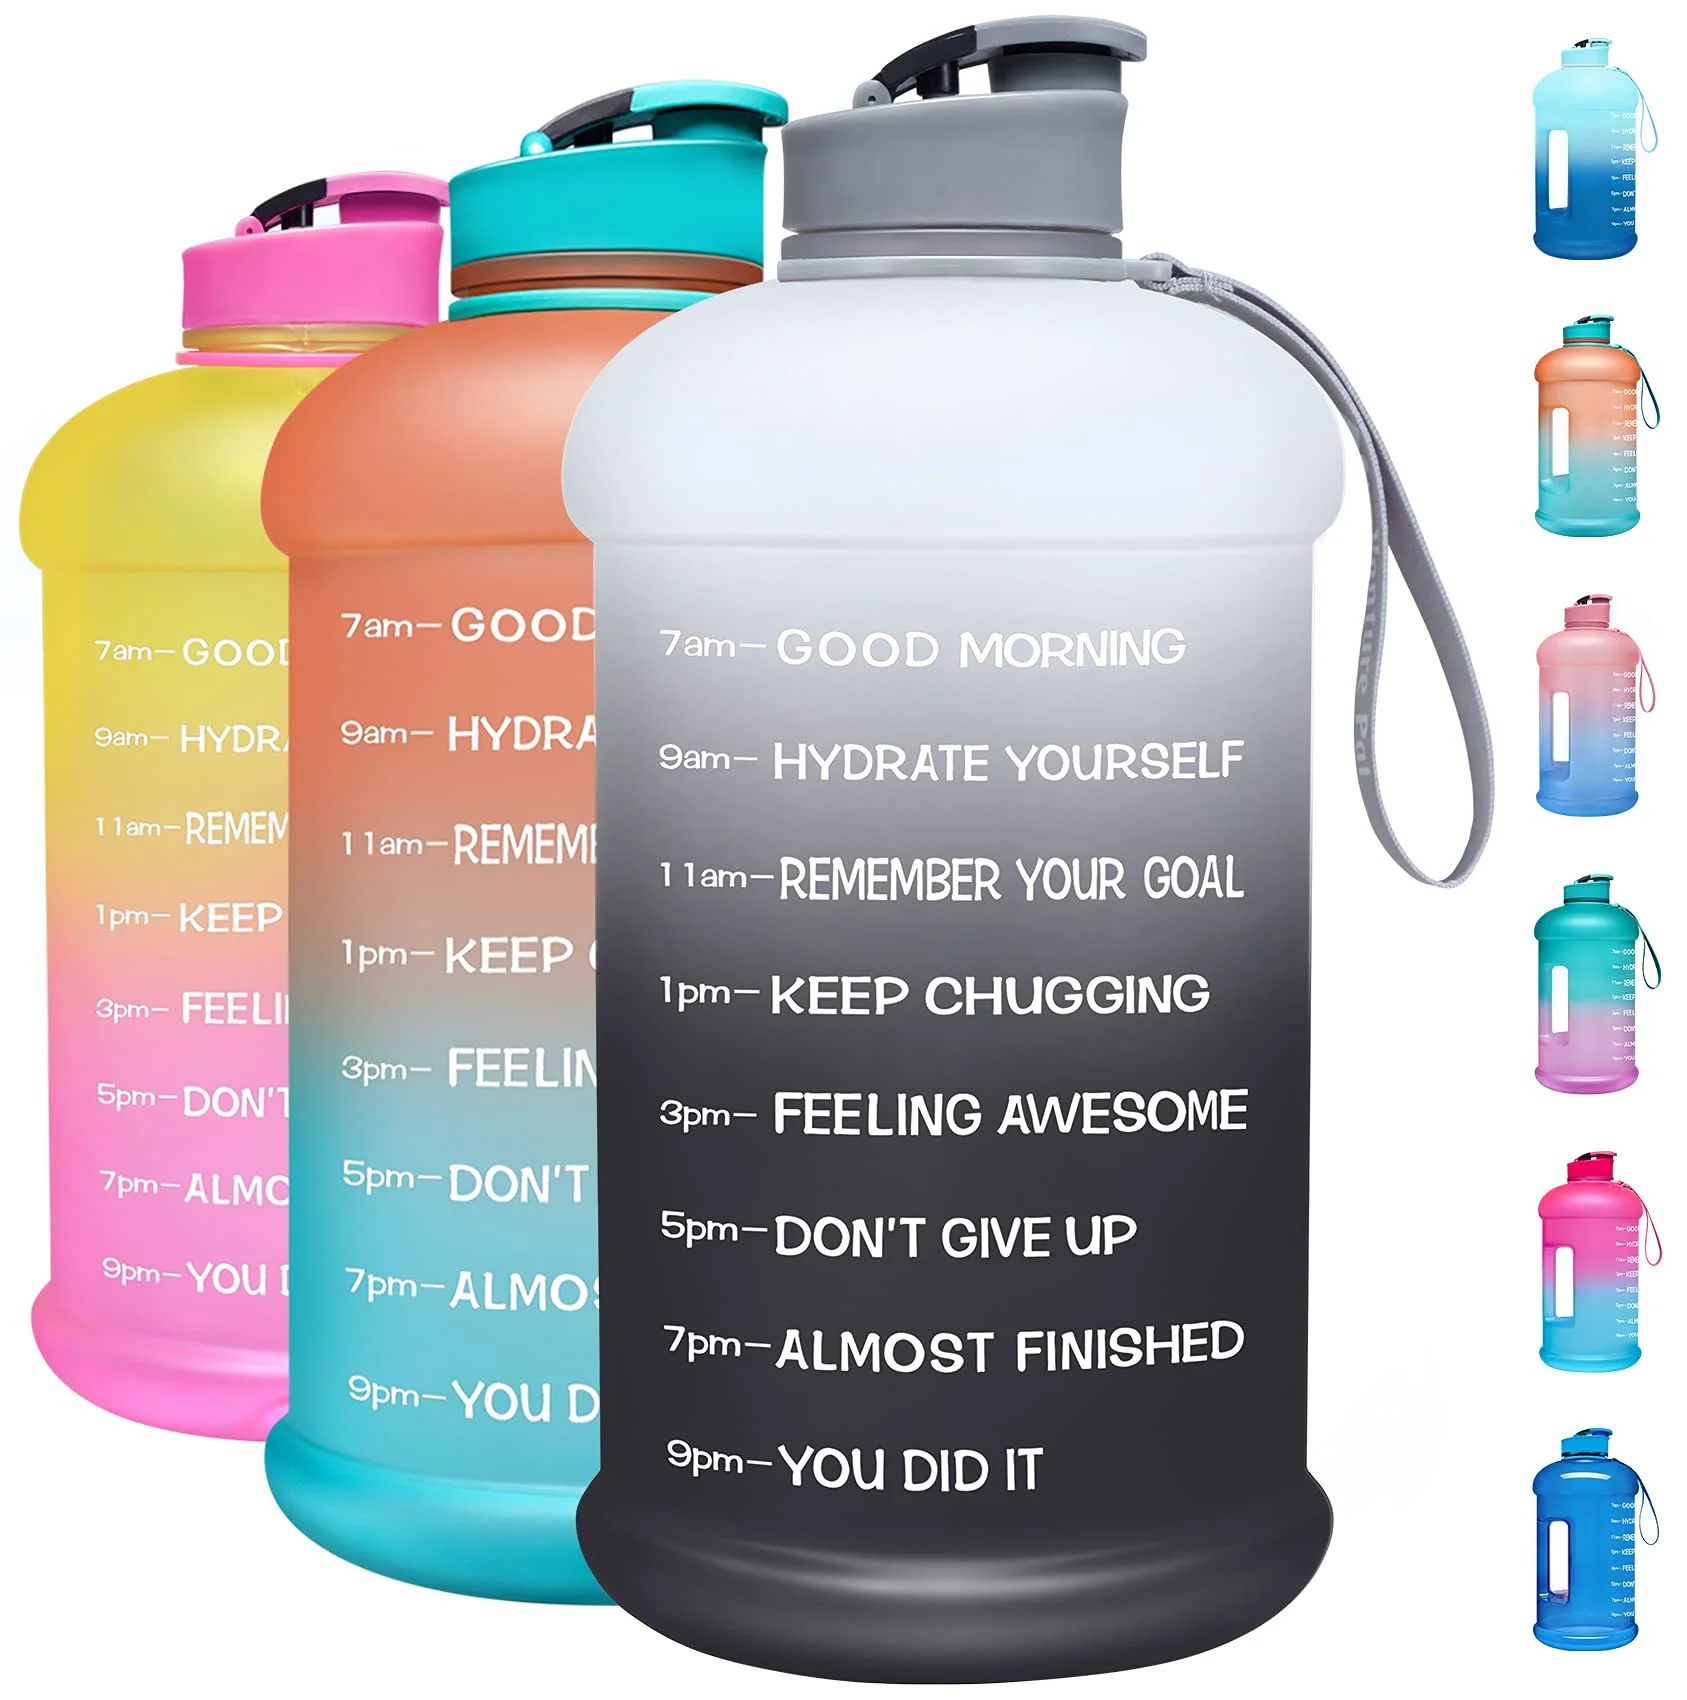 Gallon Big Water Bottle with Handle128Oz Water Bottle & Motivational Time  Marker